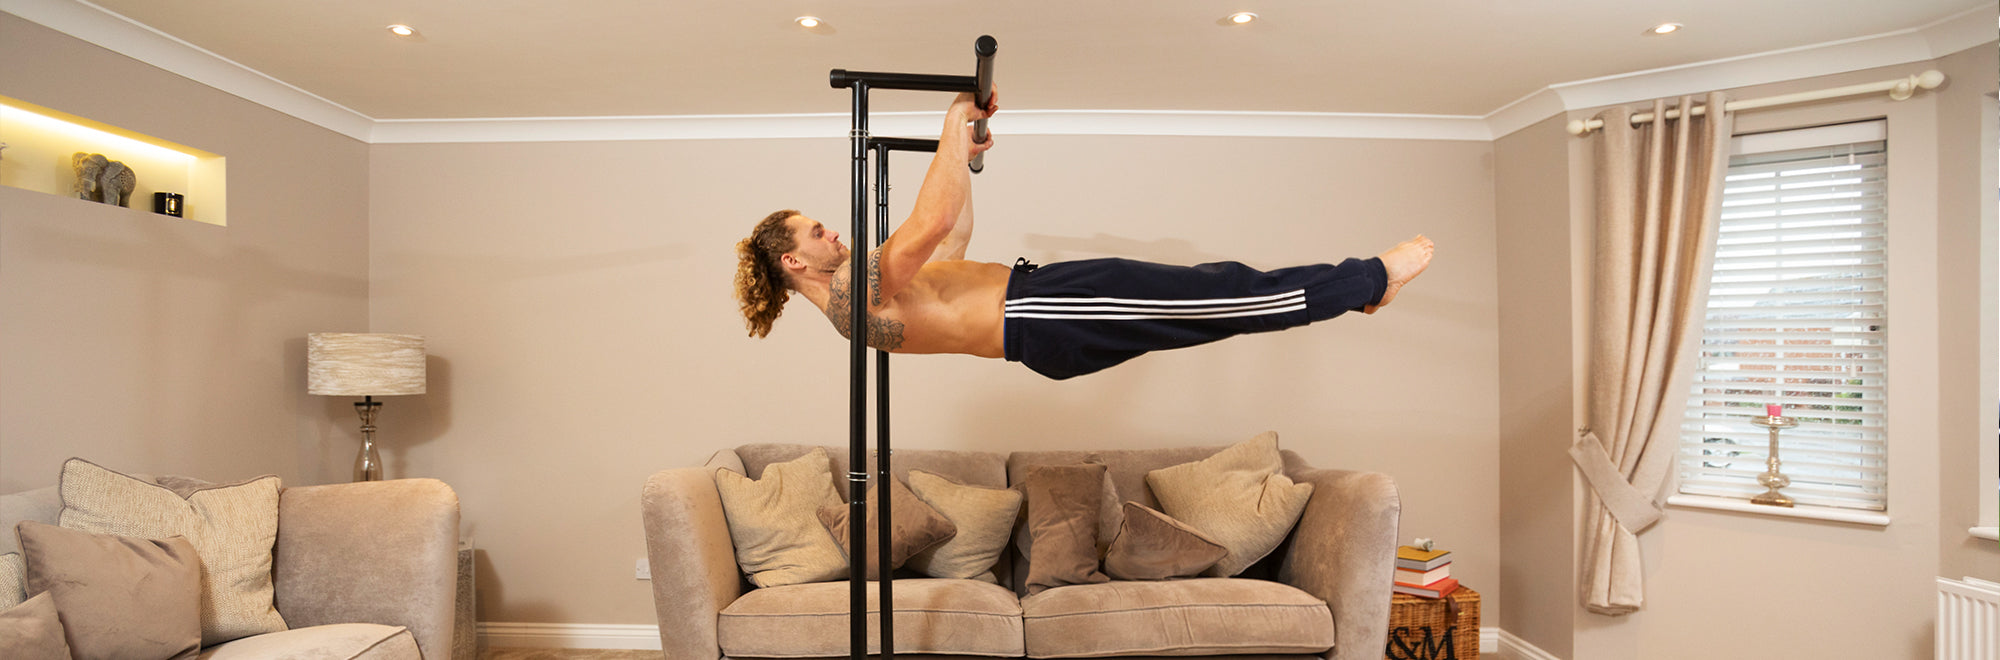 7 Exercises To Master Using Your Portable Pull Up Rack